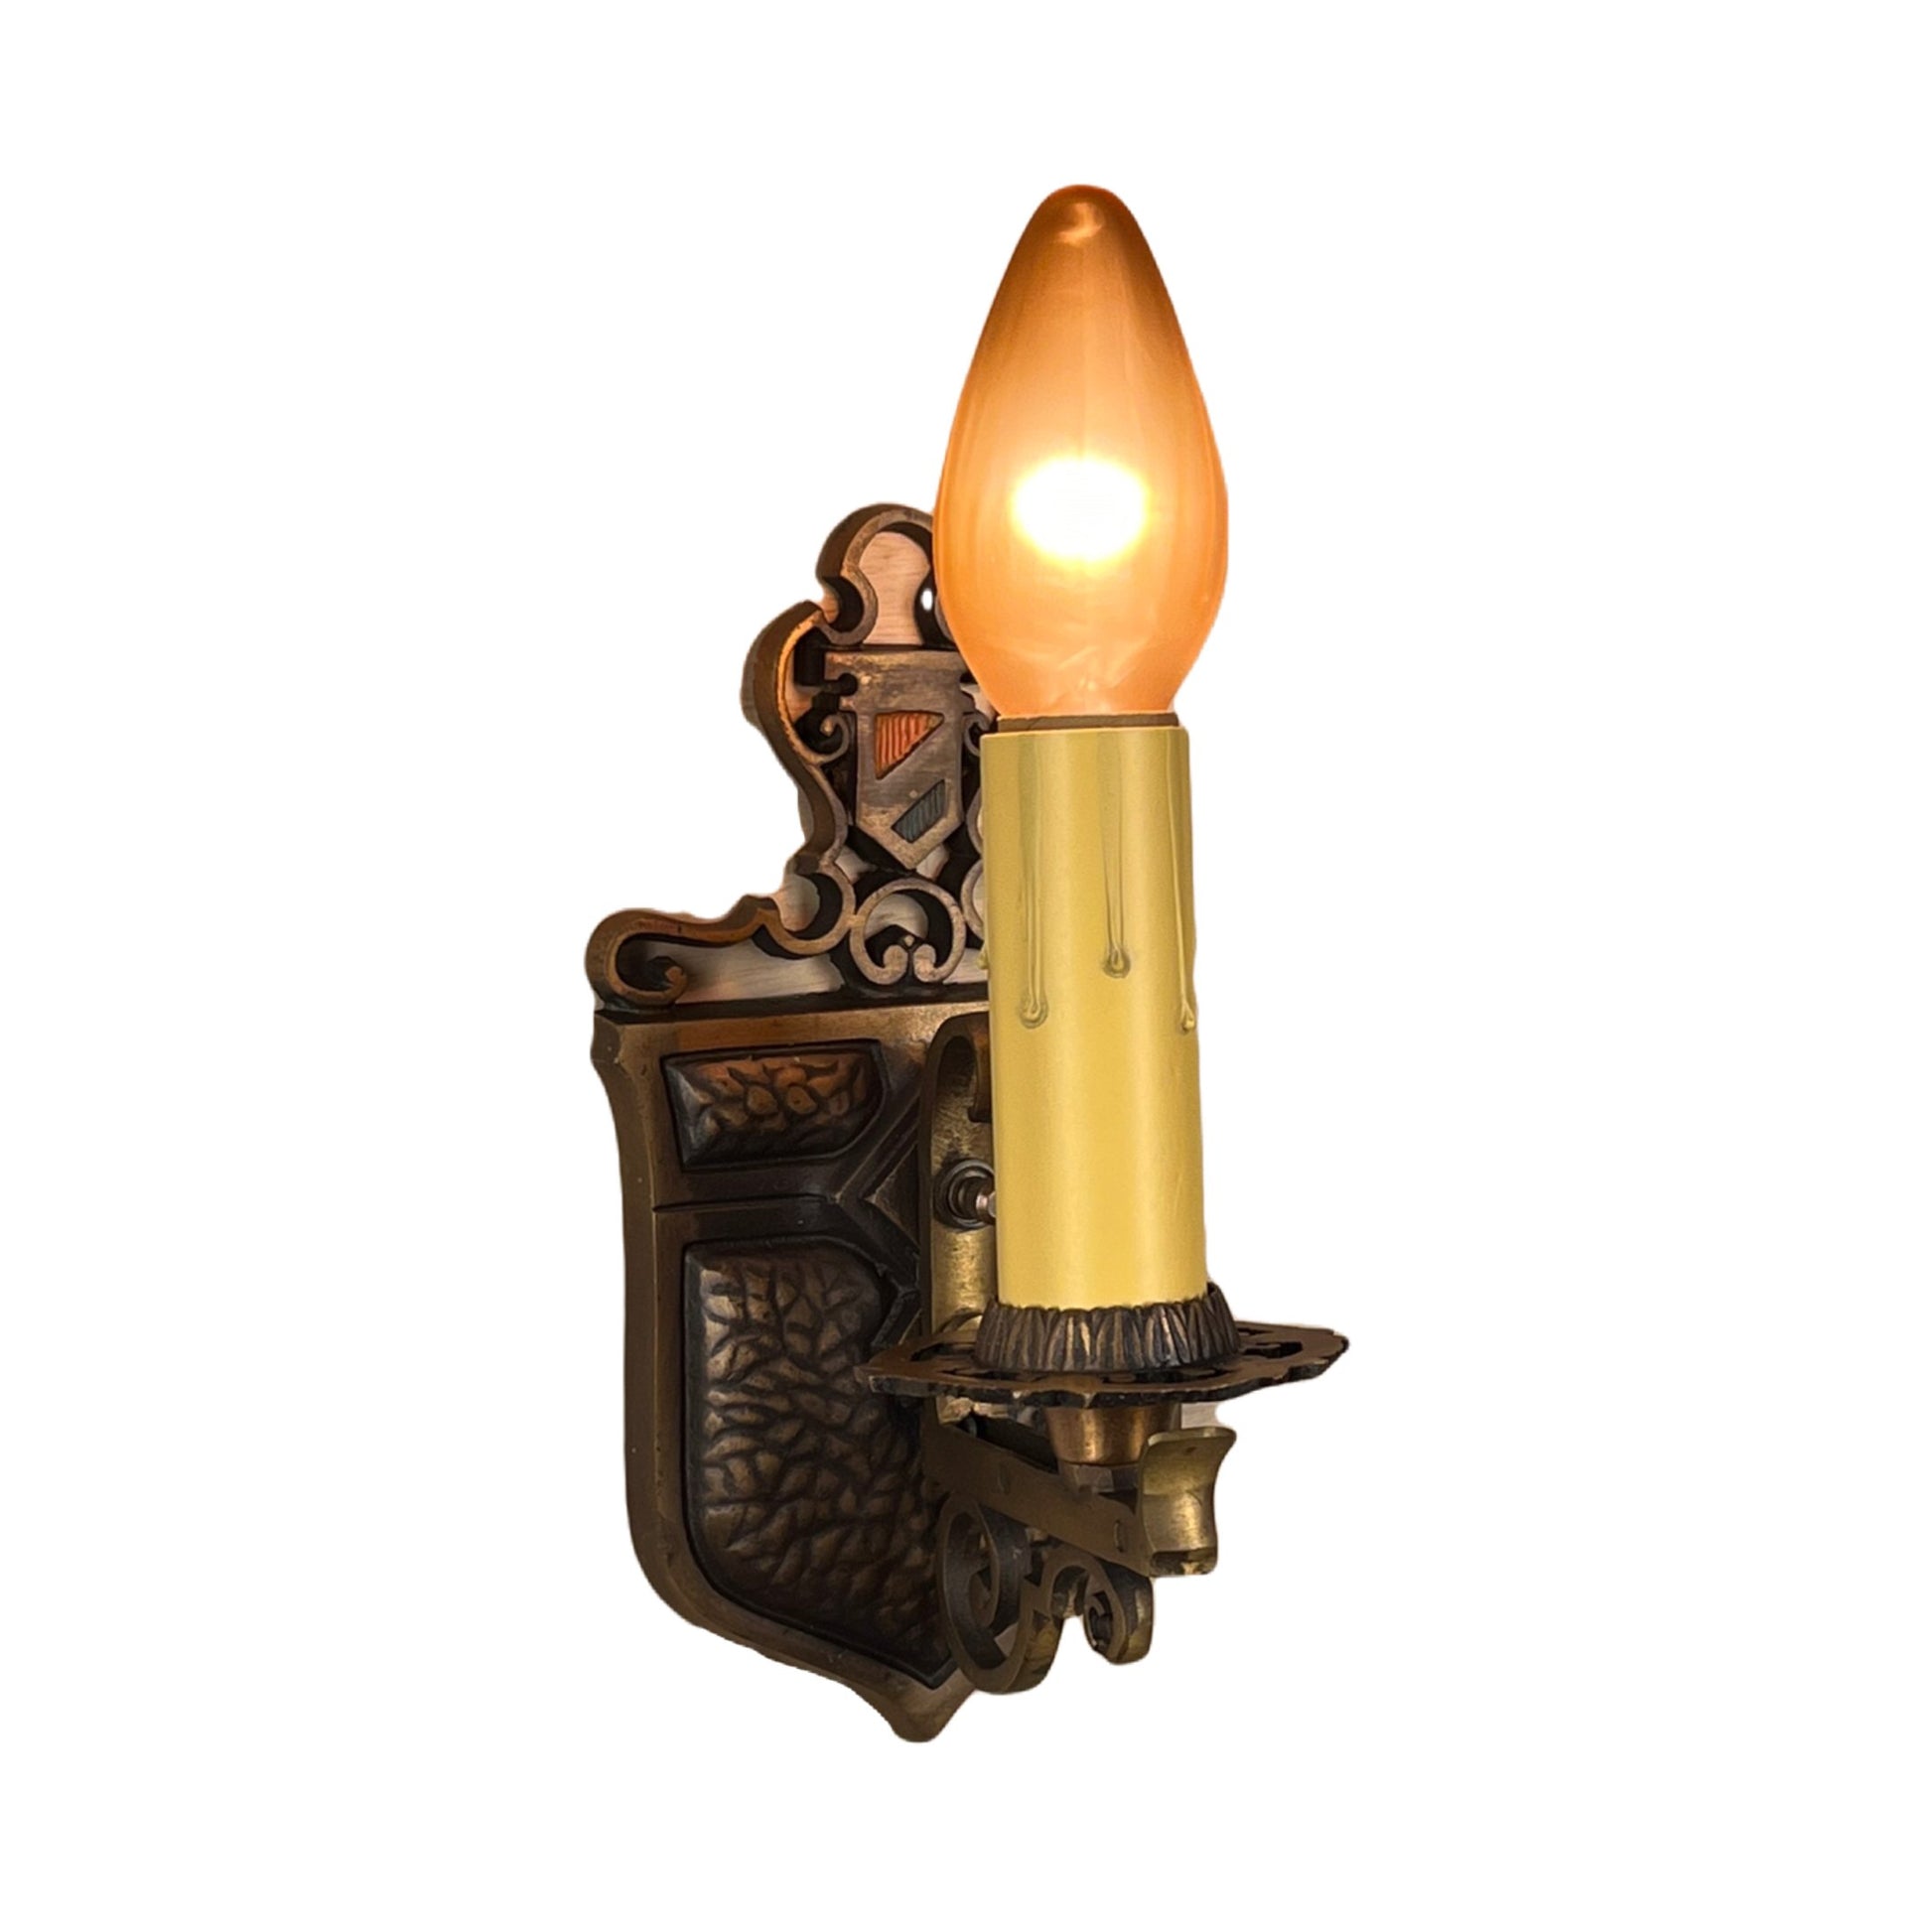 Cast Bronze Spanish Revival Sconce with Candle